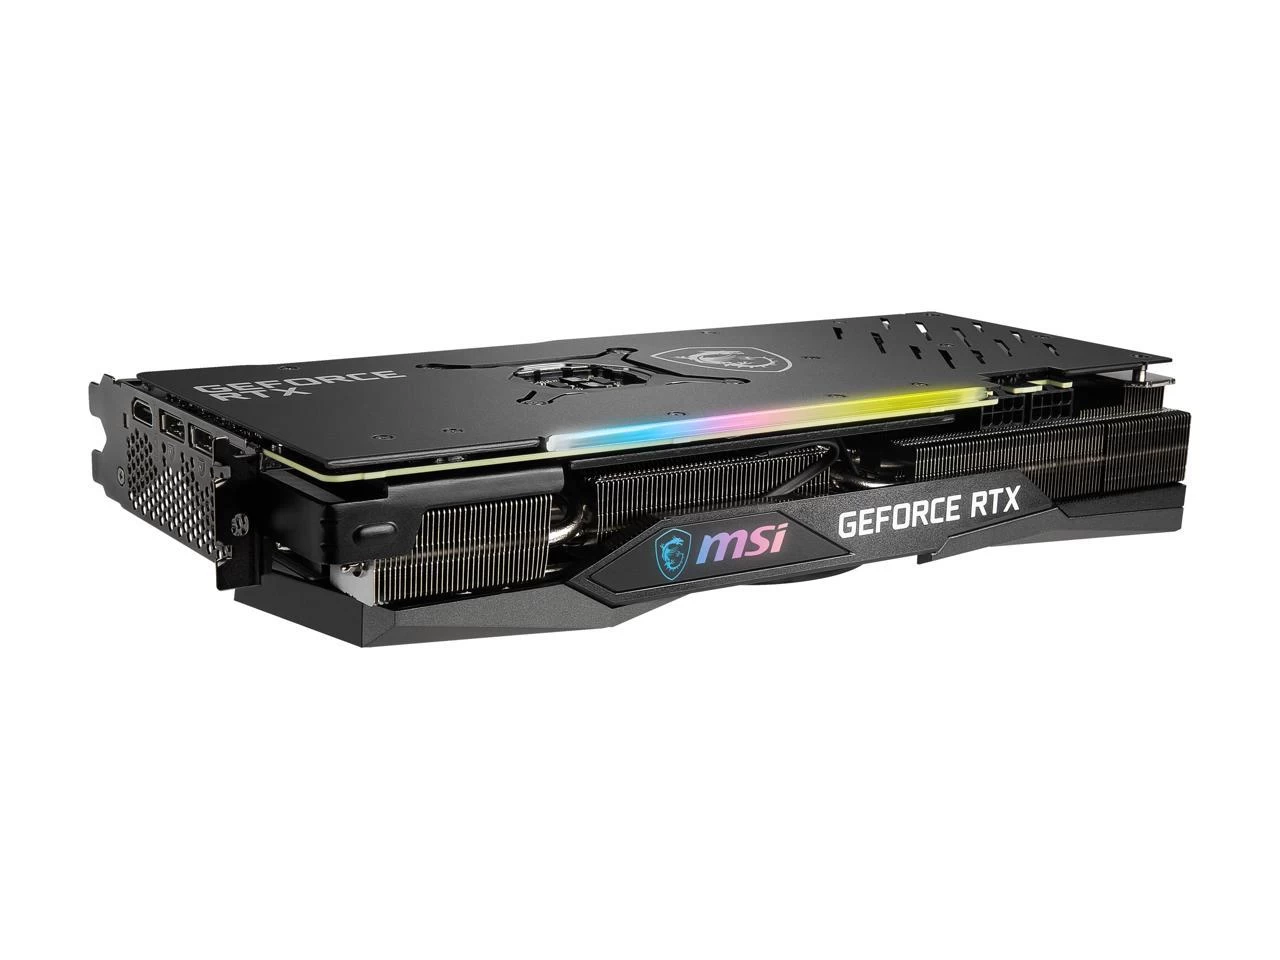 MSI GeForce RTX 3070 GAMING Z TRIO Front View